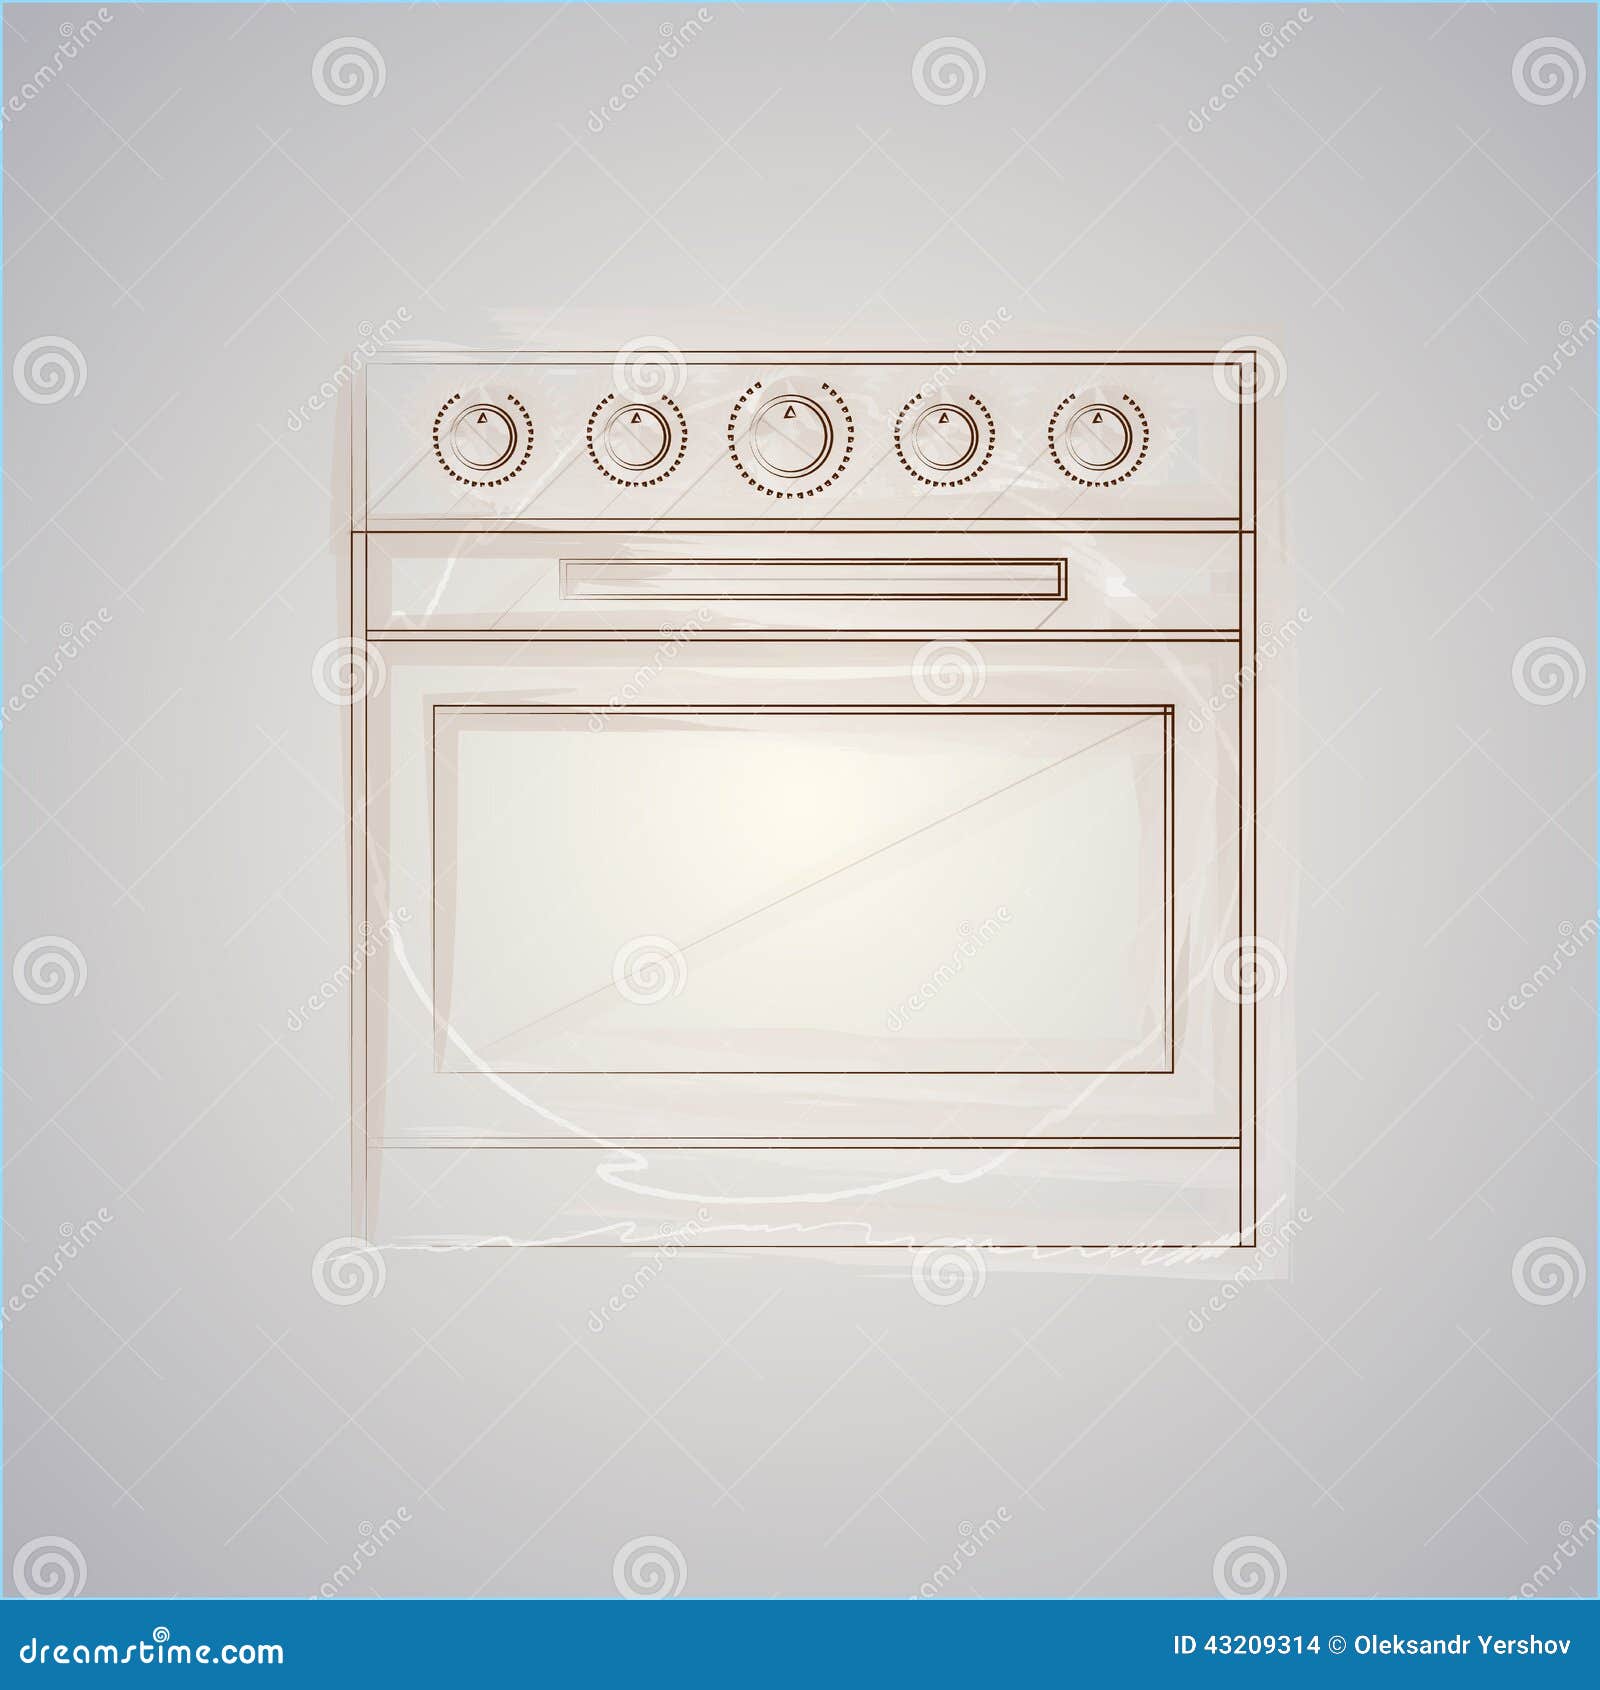 Microwave Oven Drawing Cartoon Image Elements PNG Images  PSD Free  Download  Pikbest